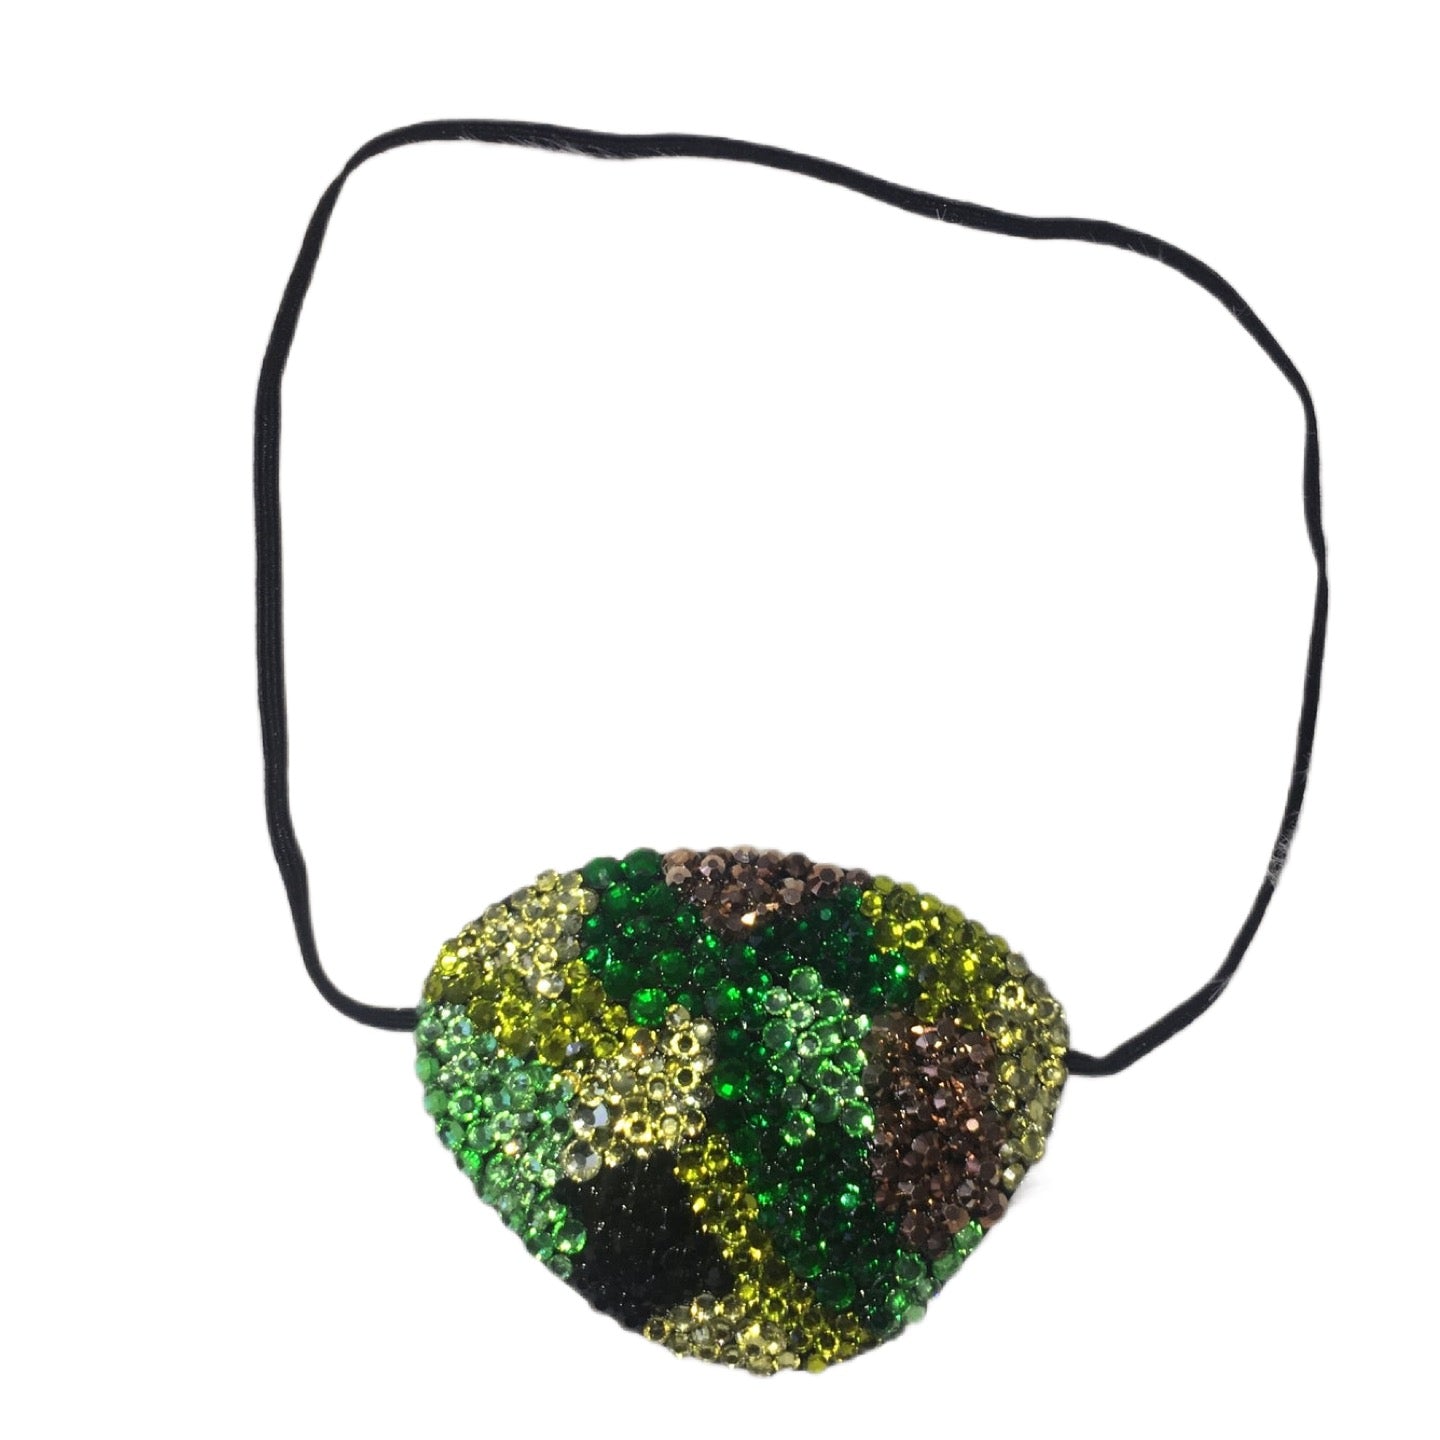 Black Eye Patch Bedazzled In Black Gold & Green Mix "Camo" Crystals